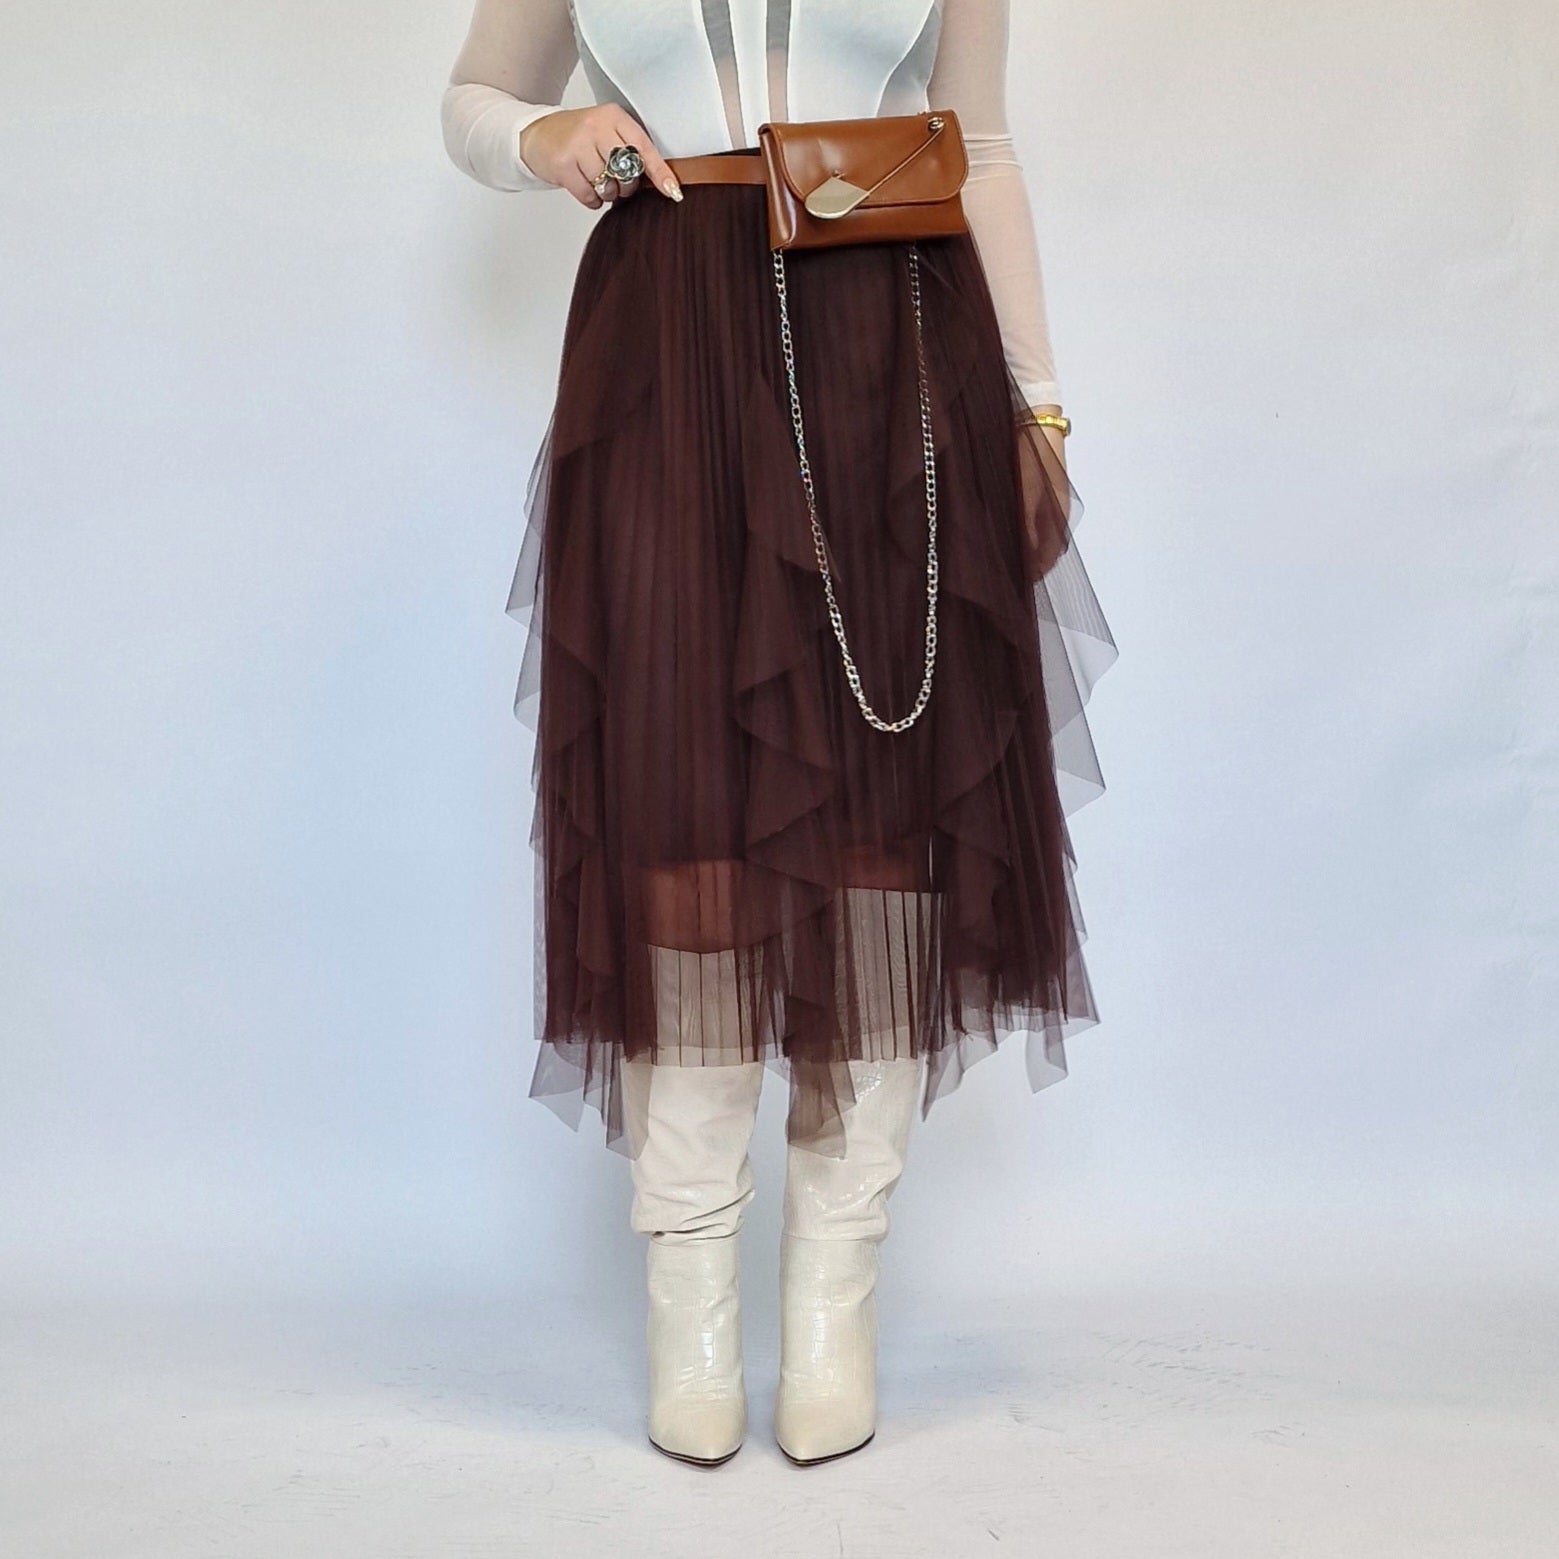 Asimje Chic Layered Tulle Skirt-SimpleModerne